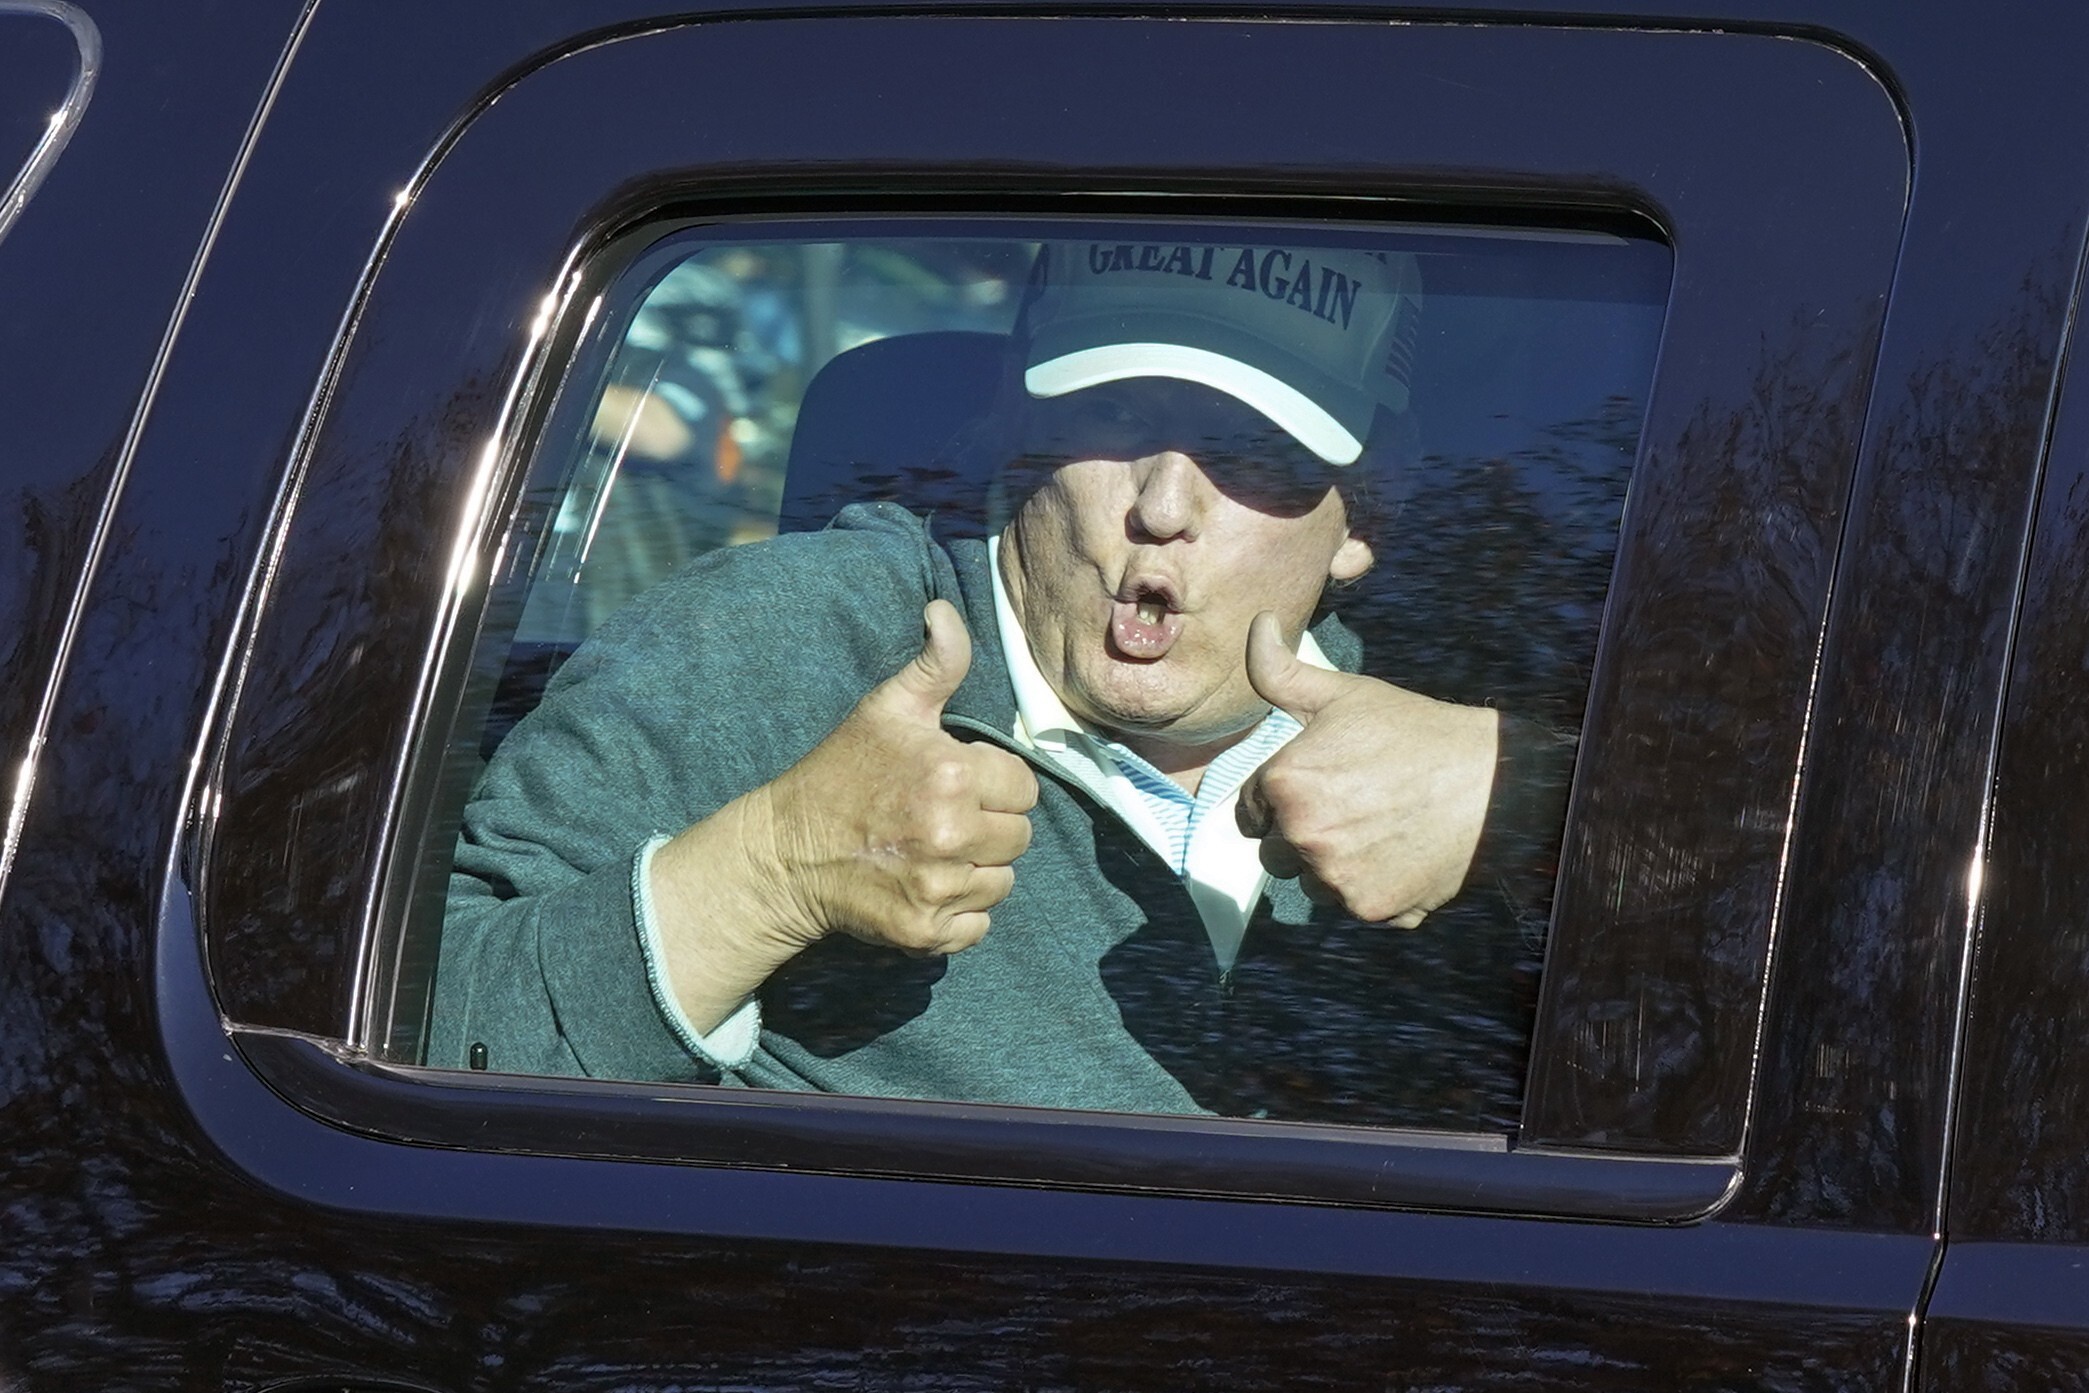 US President Donald Trump gives two thumbs up to supporters as he departs after playing golf at the Trump National Golf Club in Sterling, Virginia. Photo: AP